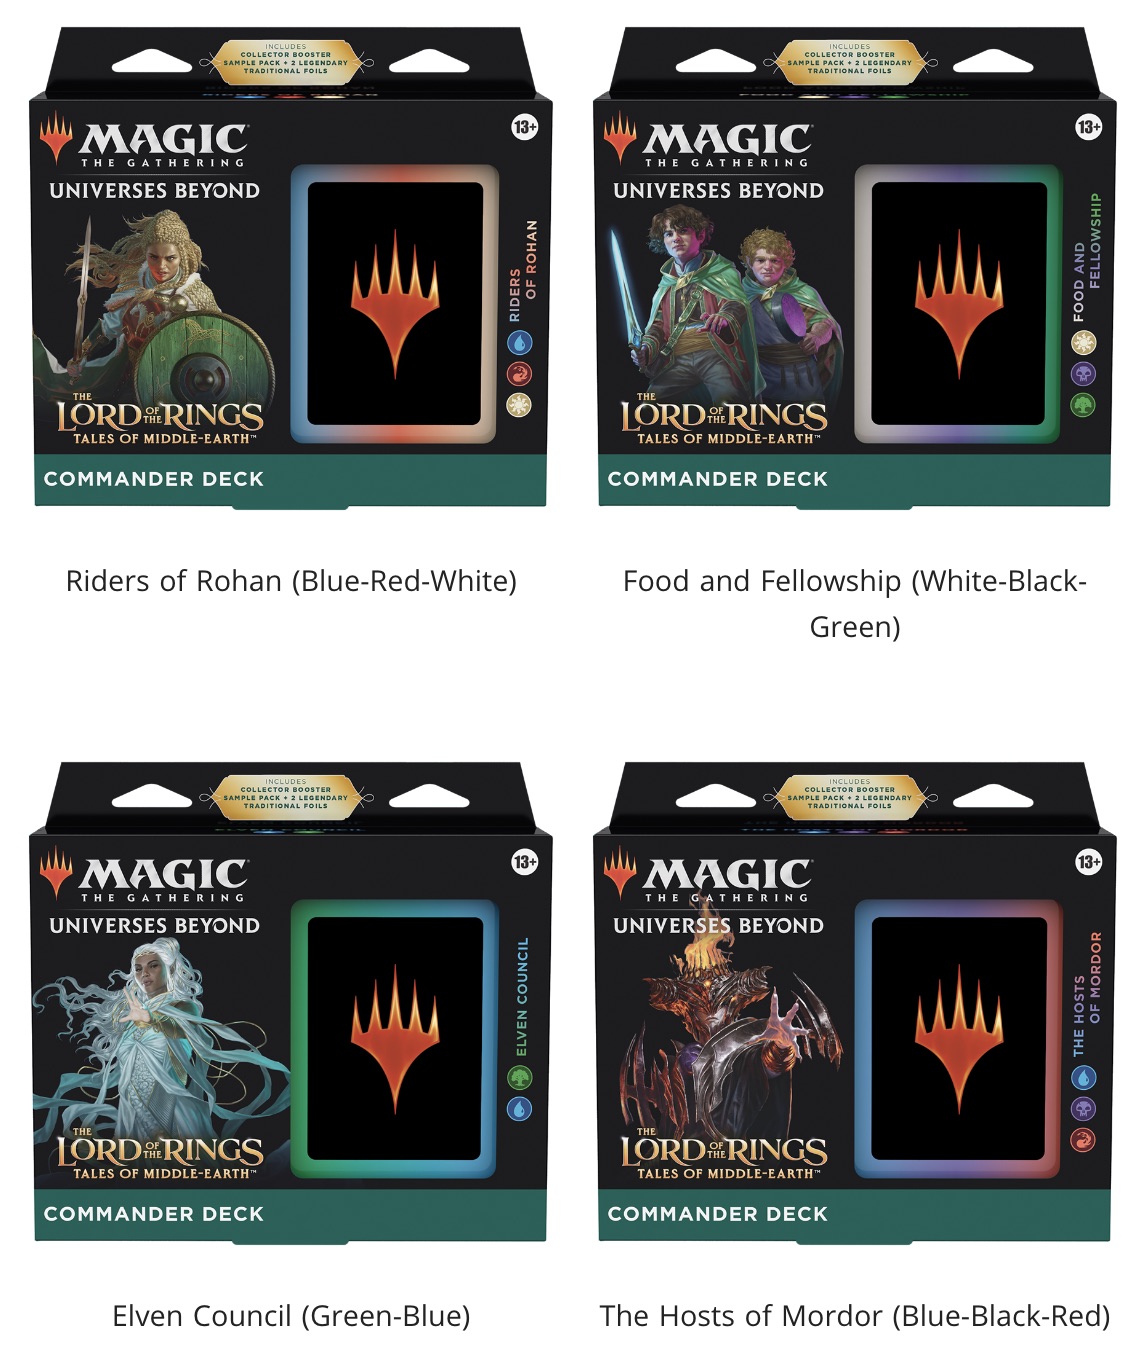 The Lord of the Rings: Tales of Middle-earth Sauron v2 Standard